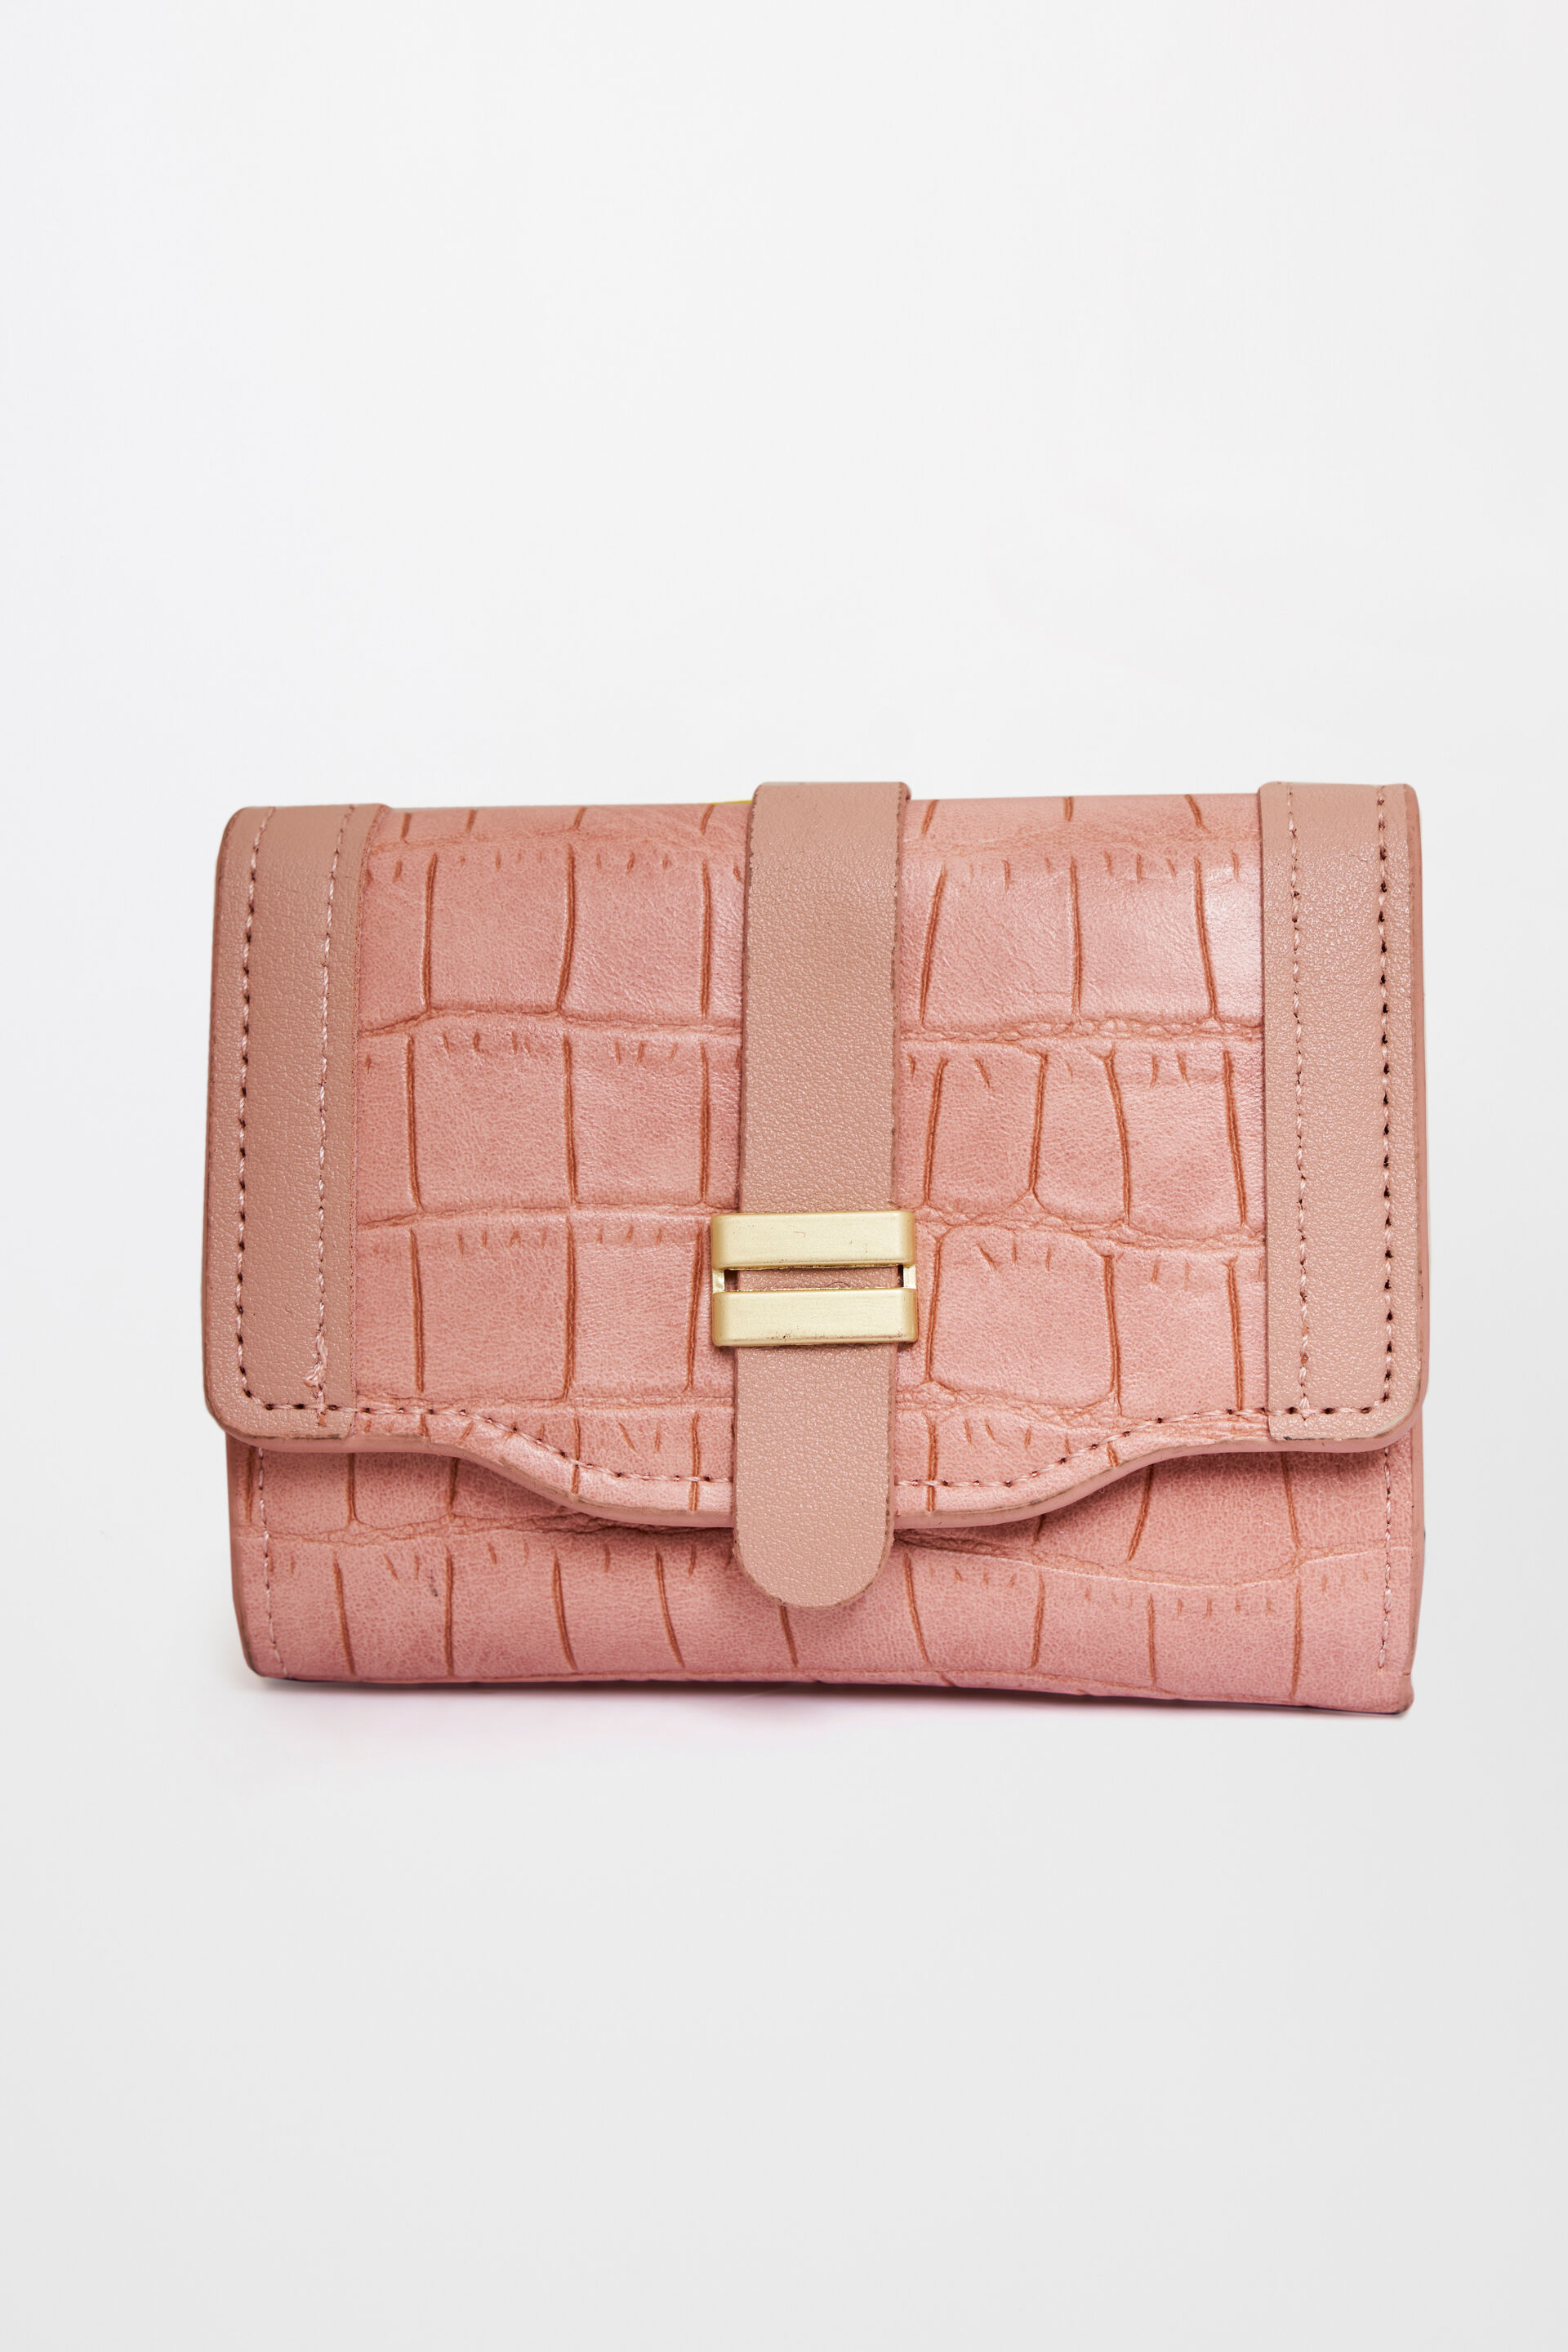 Handbags for Women -Buy Women Clutch, Sling Bags, Wallets Online | AND India